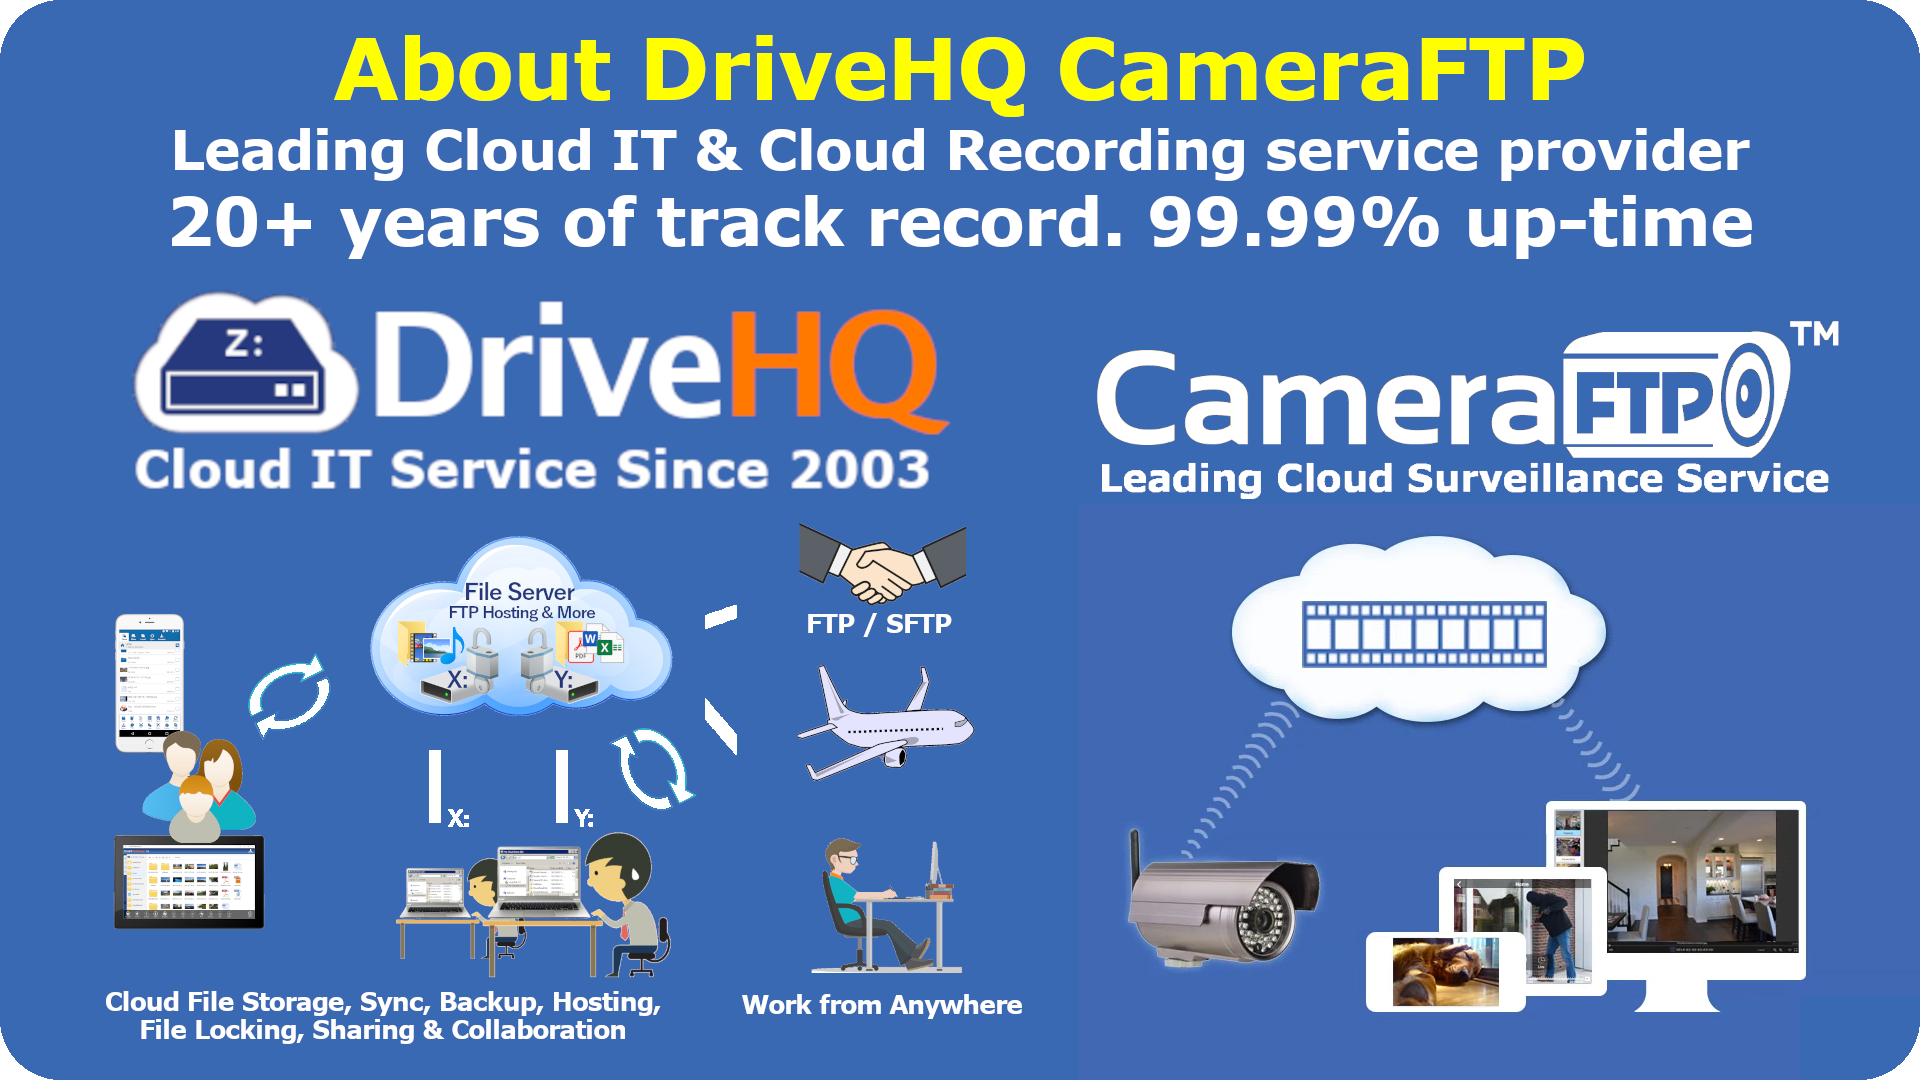 DriveHQ is a leading cloud IT service provider founded in 2003. It offers the best cloud file server/WebDAV drive mapping, FTP/SFTP server hosting, cloud file sharing and collaboration services. CameraFTP is a leading Cloud Recording service provider and a DriveHQ division. DriveHQ has over 20 years of track record. Our service up-time is over 99.99%!